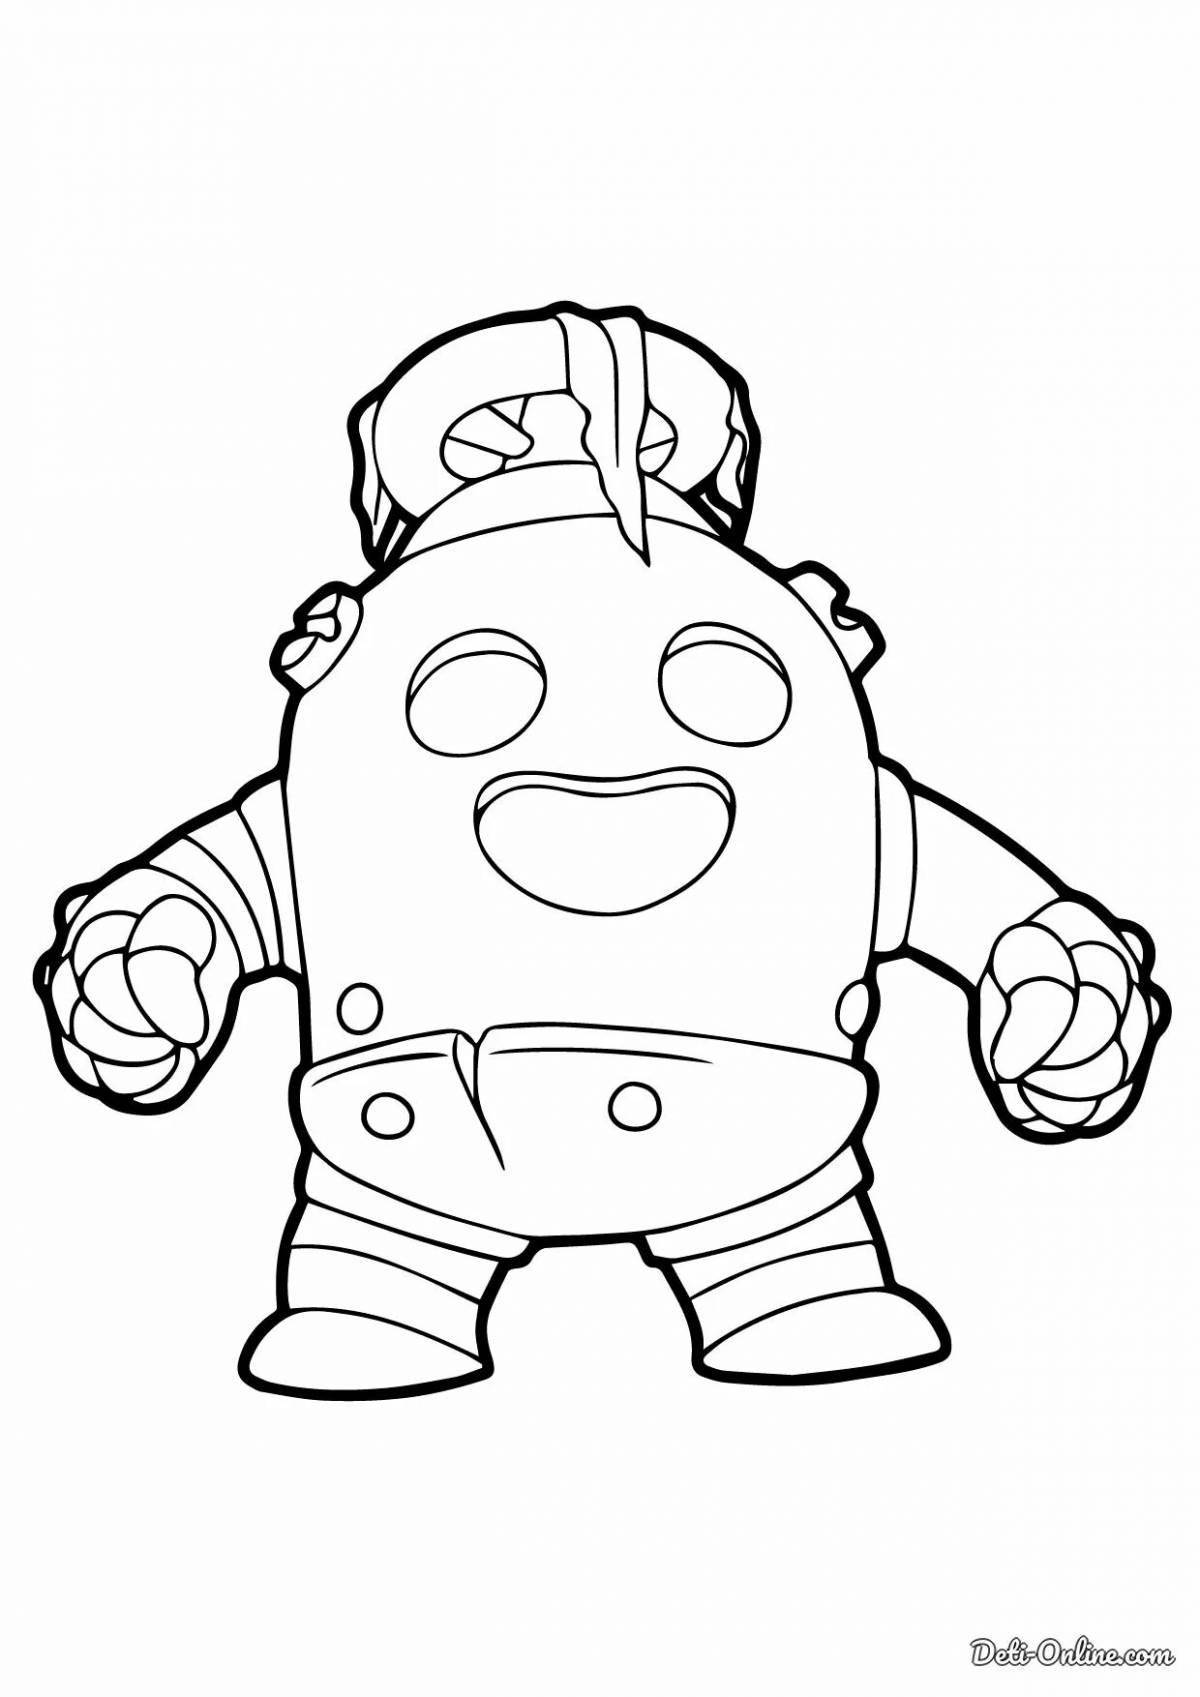 Dazzling bravo stars buzz coloring page